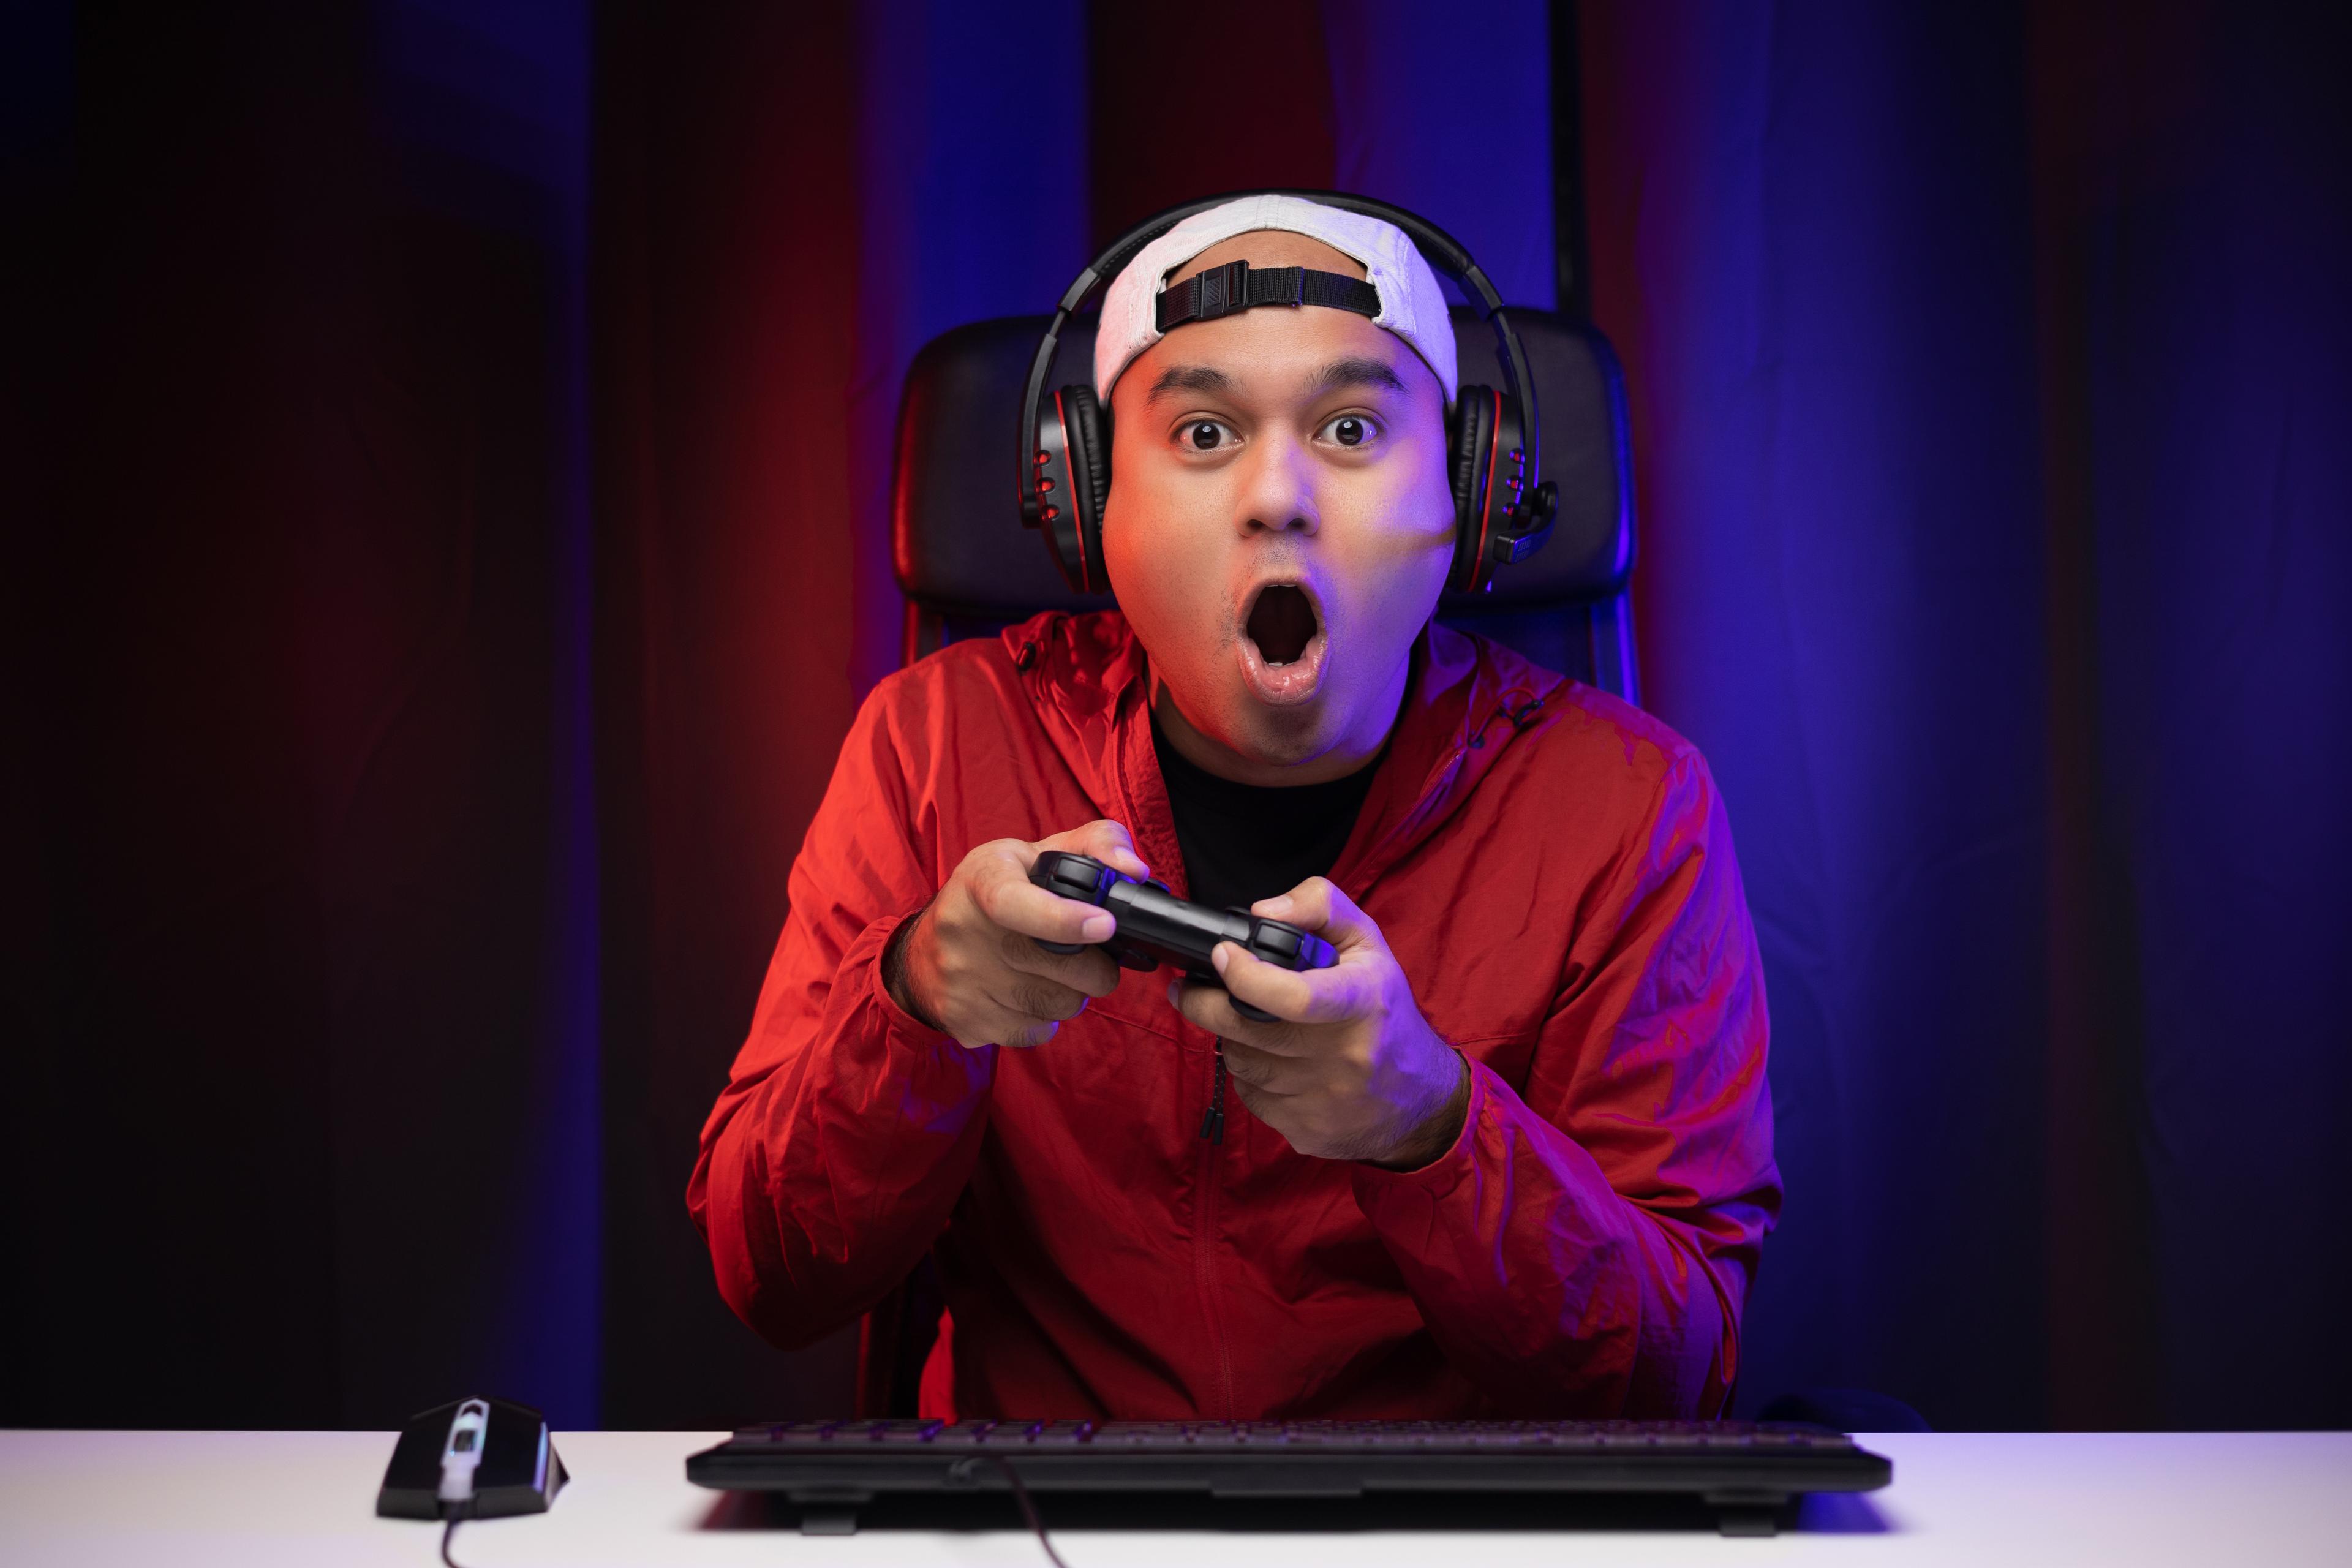 A gamer looks excited while enjoying their gaming chair, laptop and accessories.